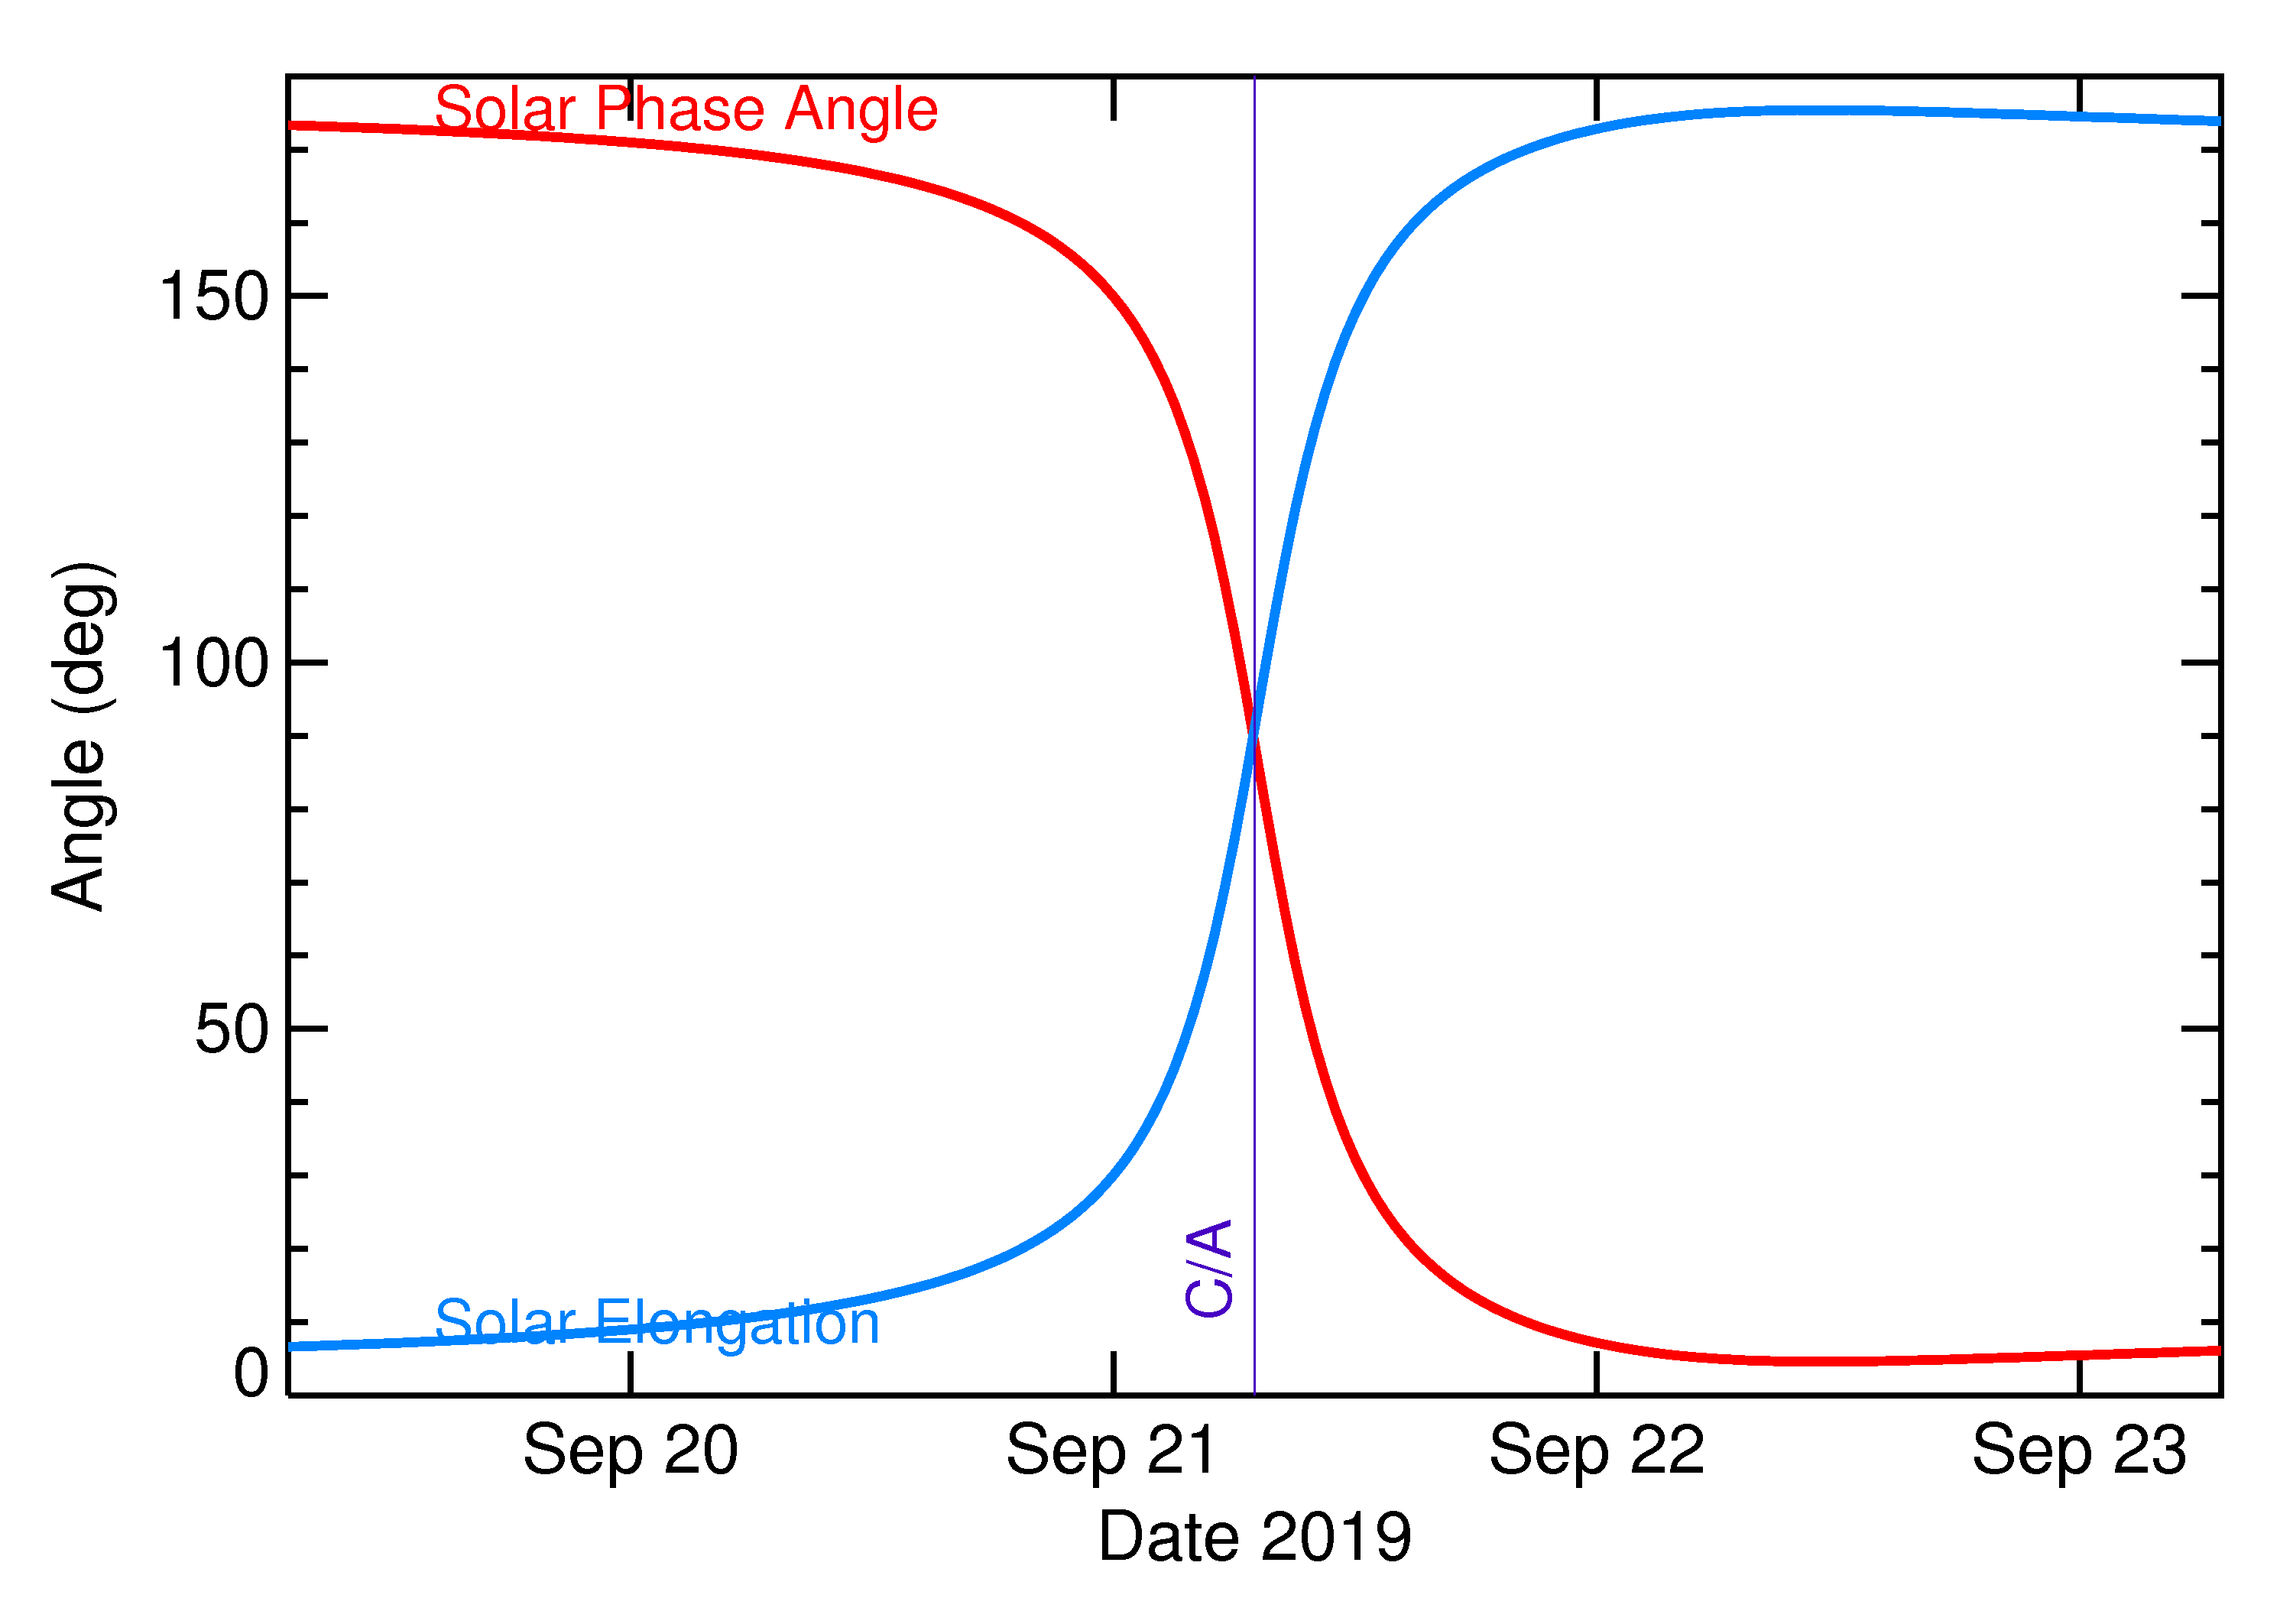 Solar Elongation and Solar Phase Angle of 2019 SS2 in the days around closest approach